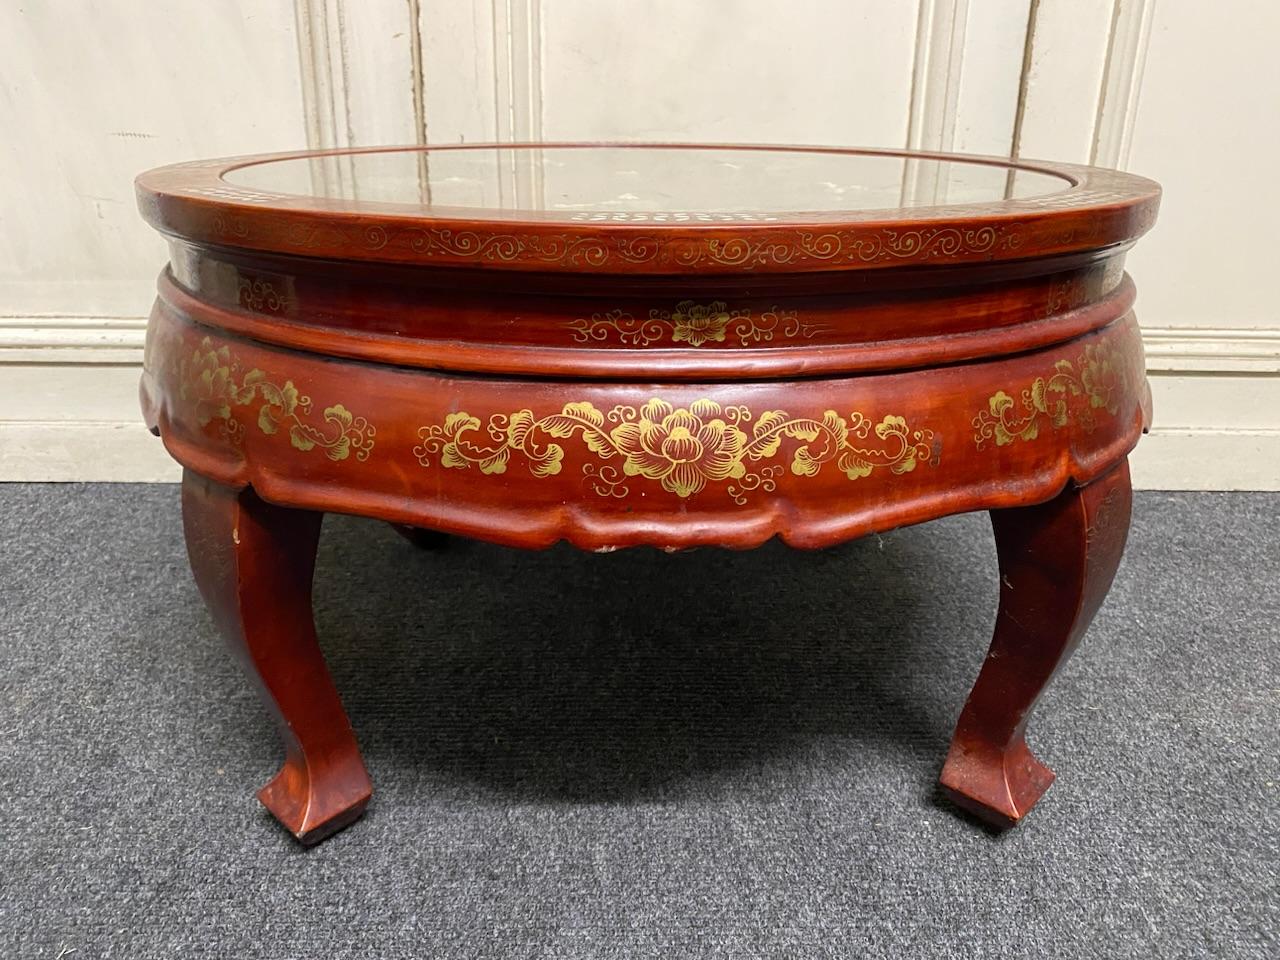 A highly decorative Lacquer Coffee table, the glass comes out to clean. No missing pieces and its in excellent overall original condition.
Diameter 77 cm
Height 46 cm